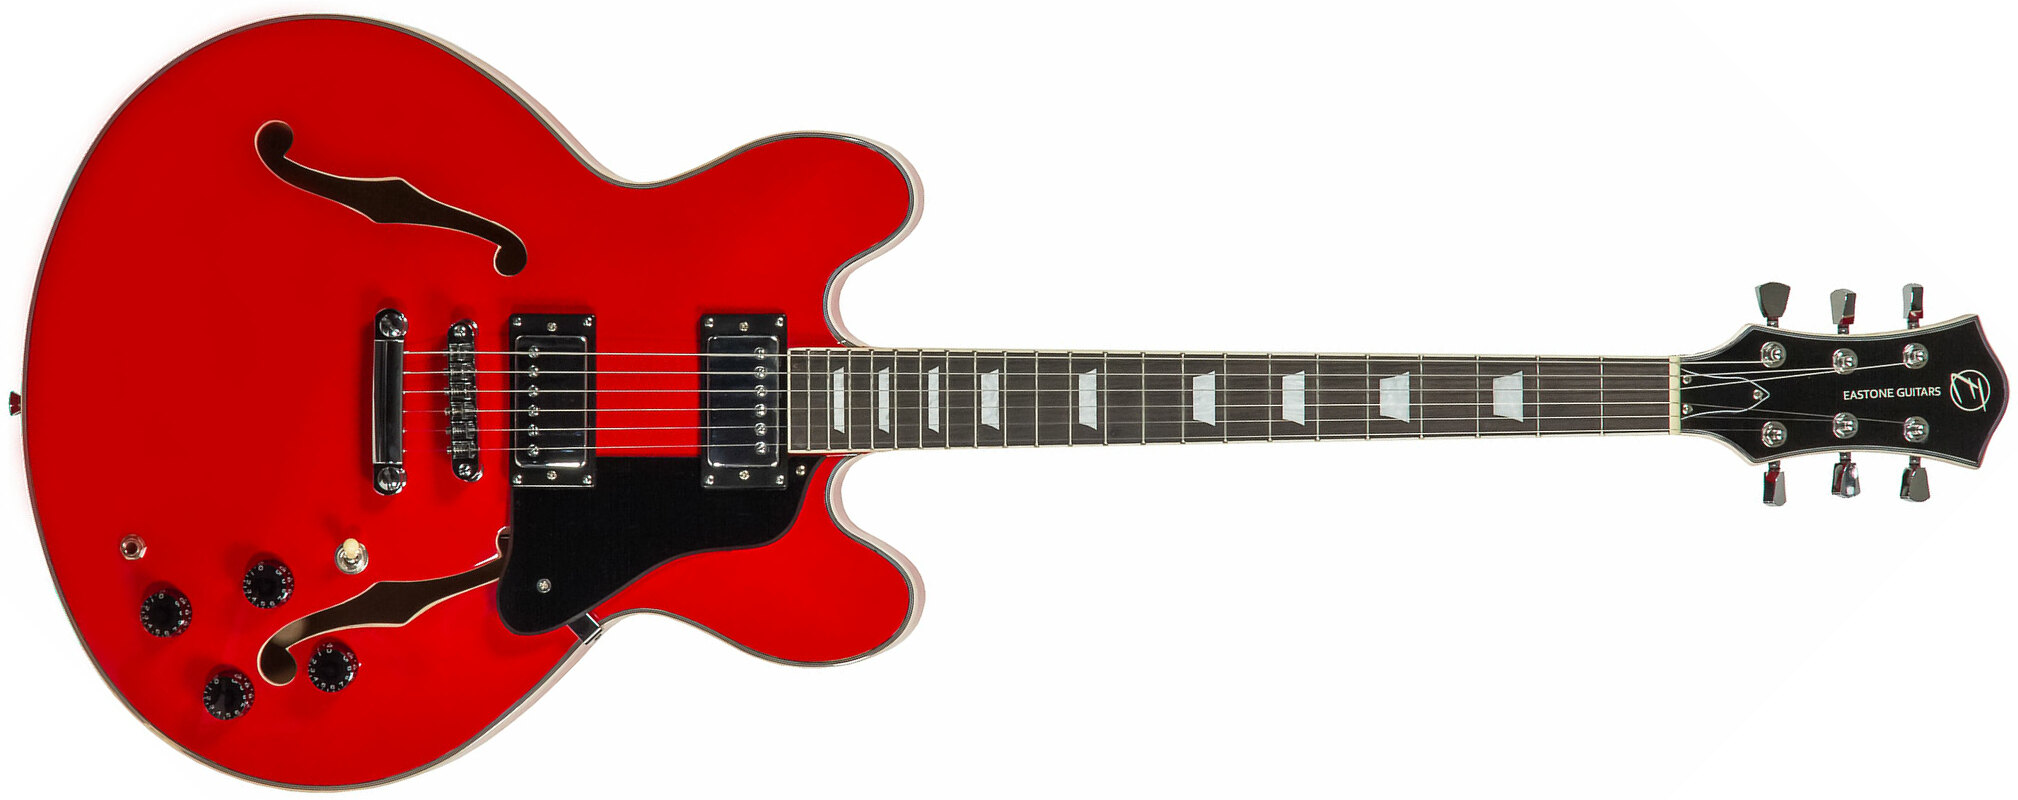 Eastone Gj70 Hh Ht Pur - Red - Semi-hollow electric guitar - Main picture